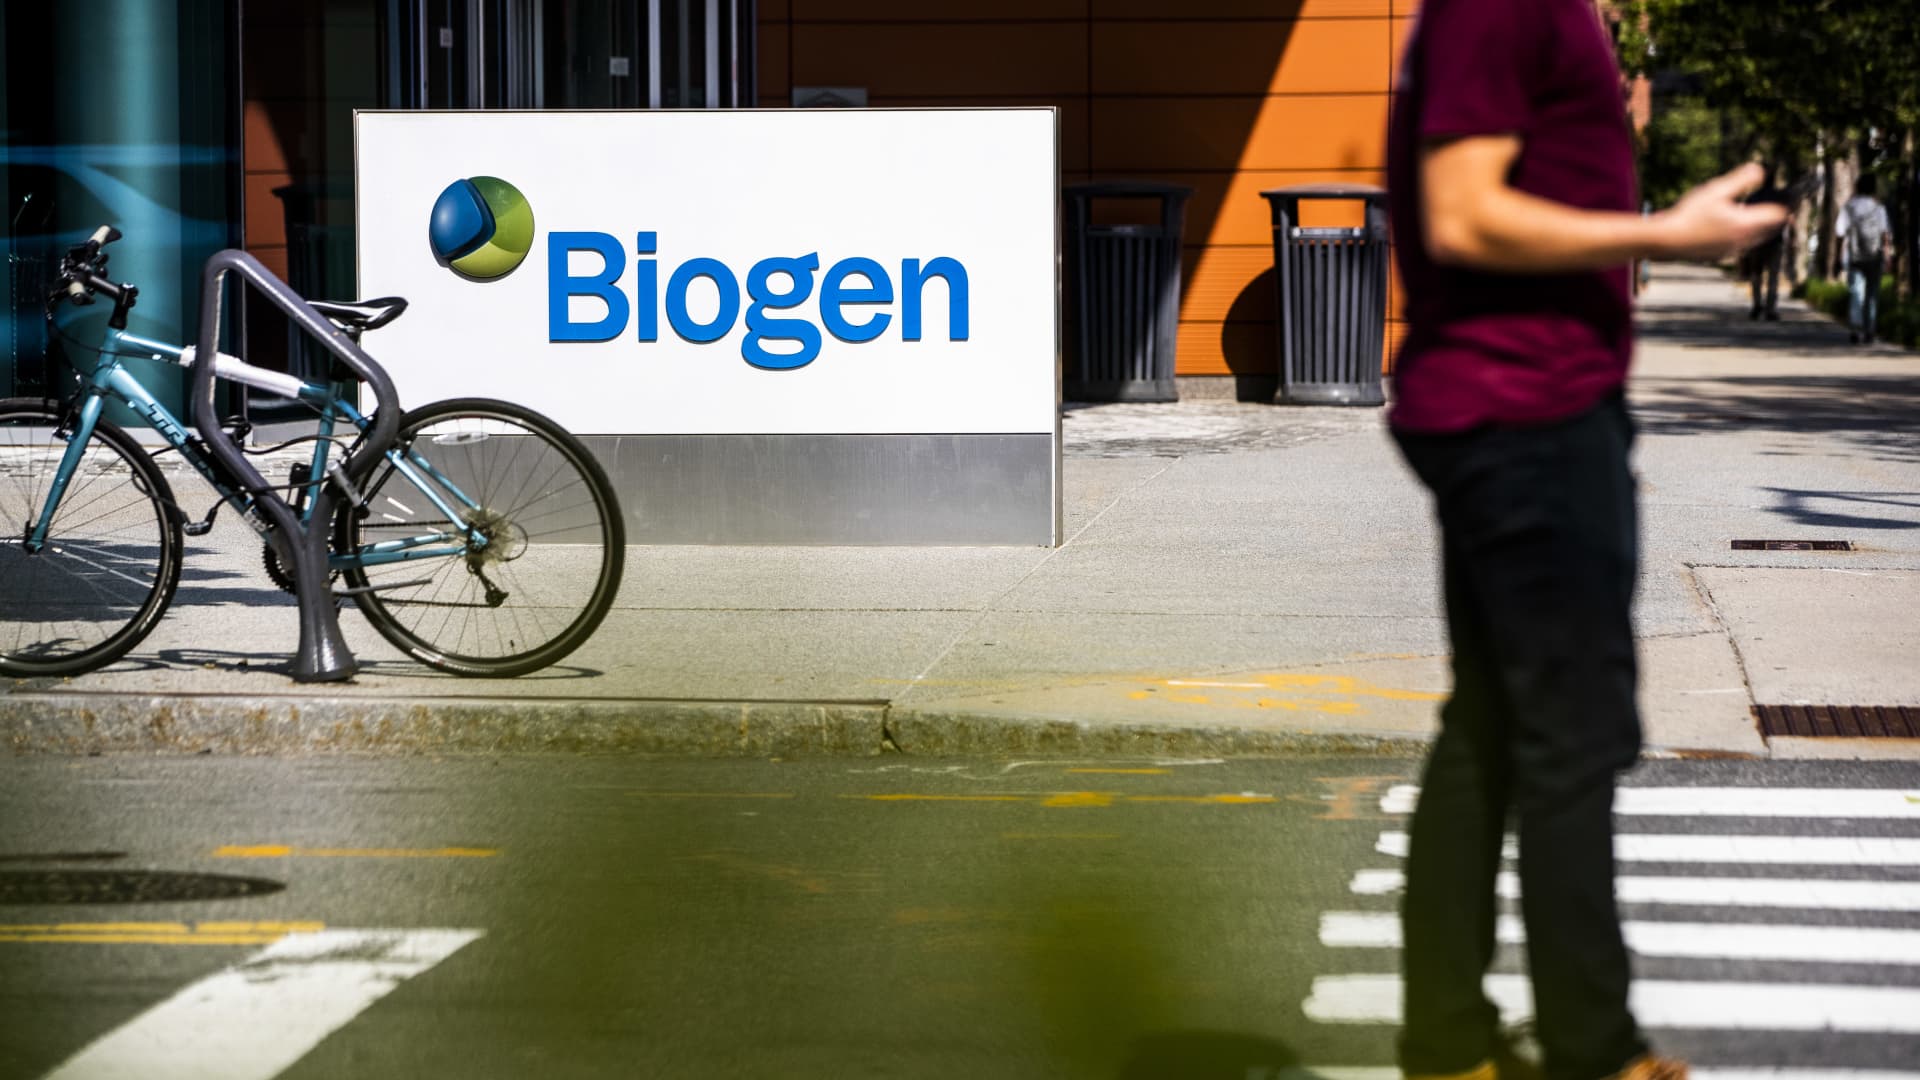 Biogen isn't concerned about competing with Eli Lilly in the Alzheimer’s drug space, CEO says